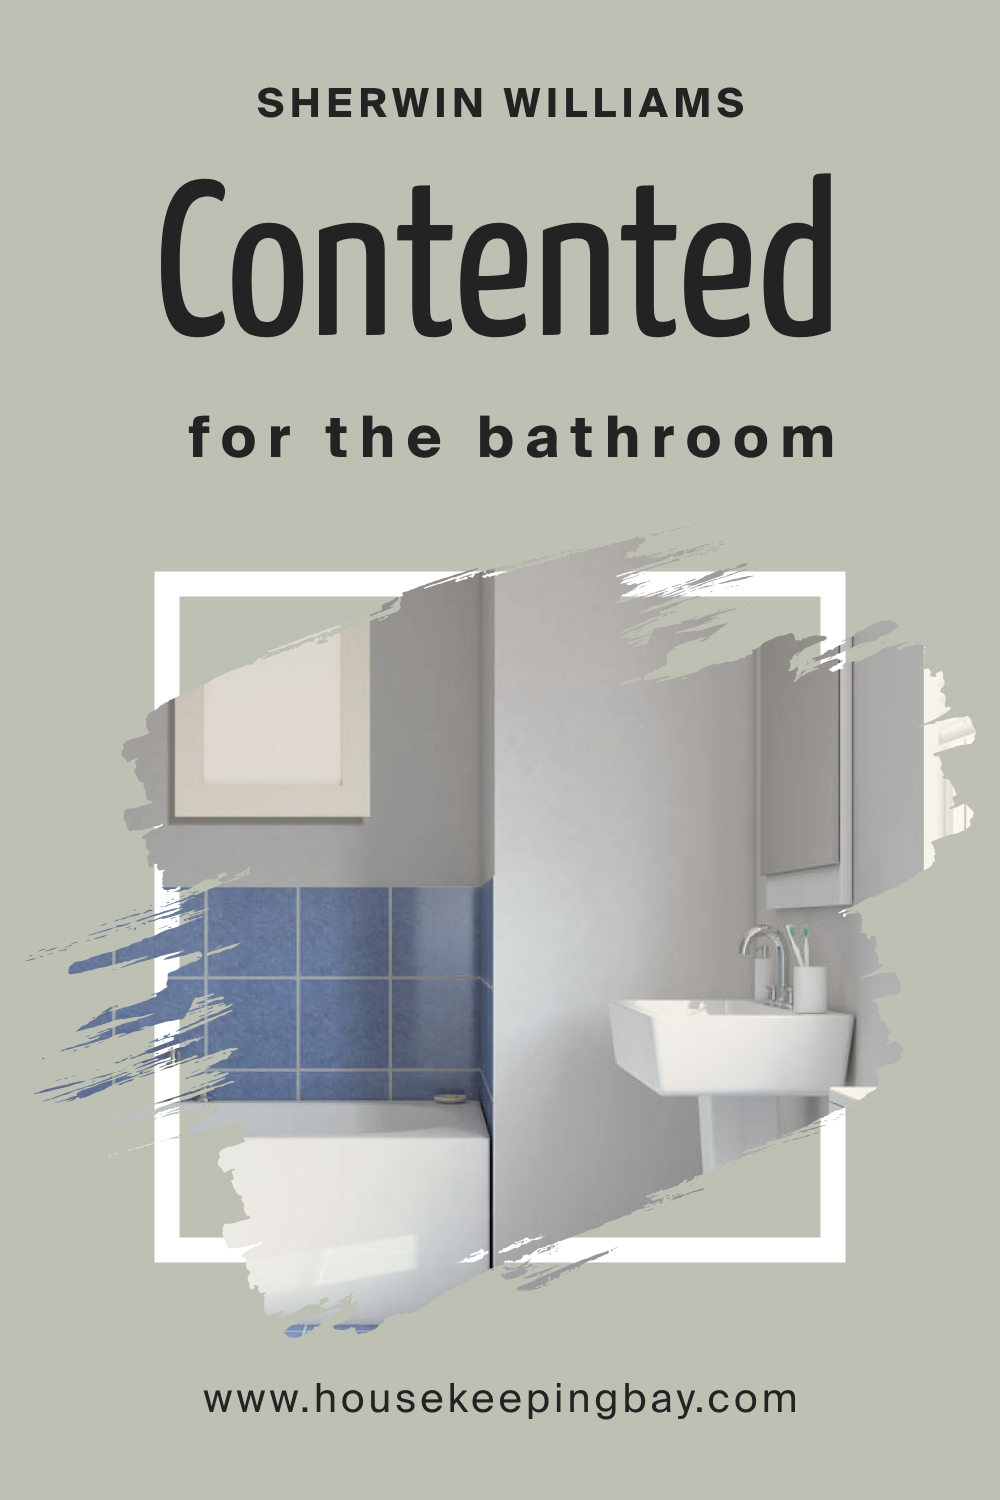 Sherwin Williams. SW 6191 Contented For the Bathroom